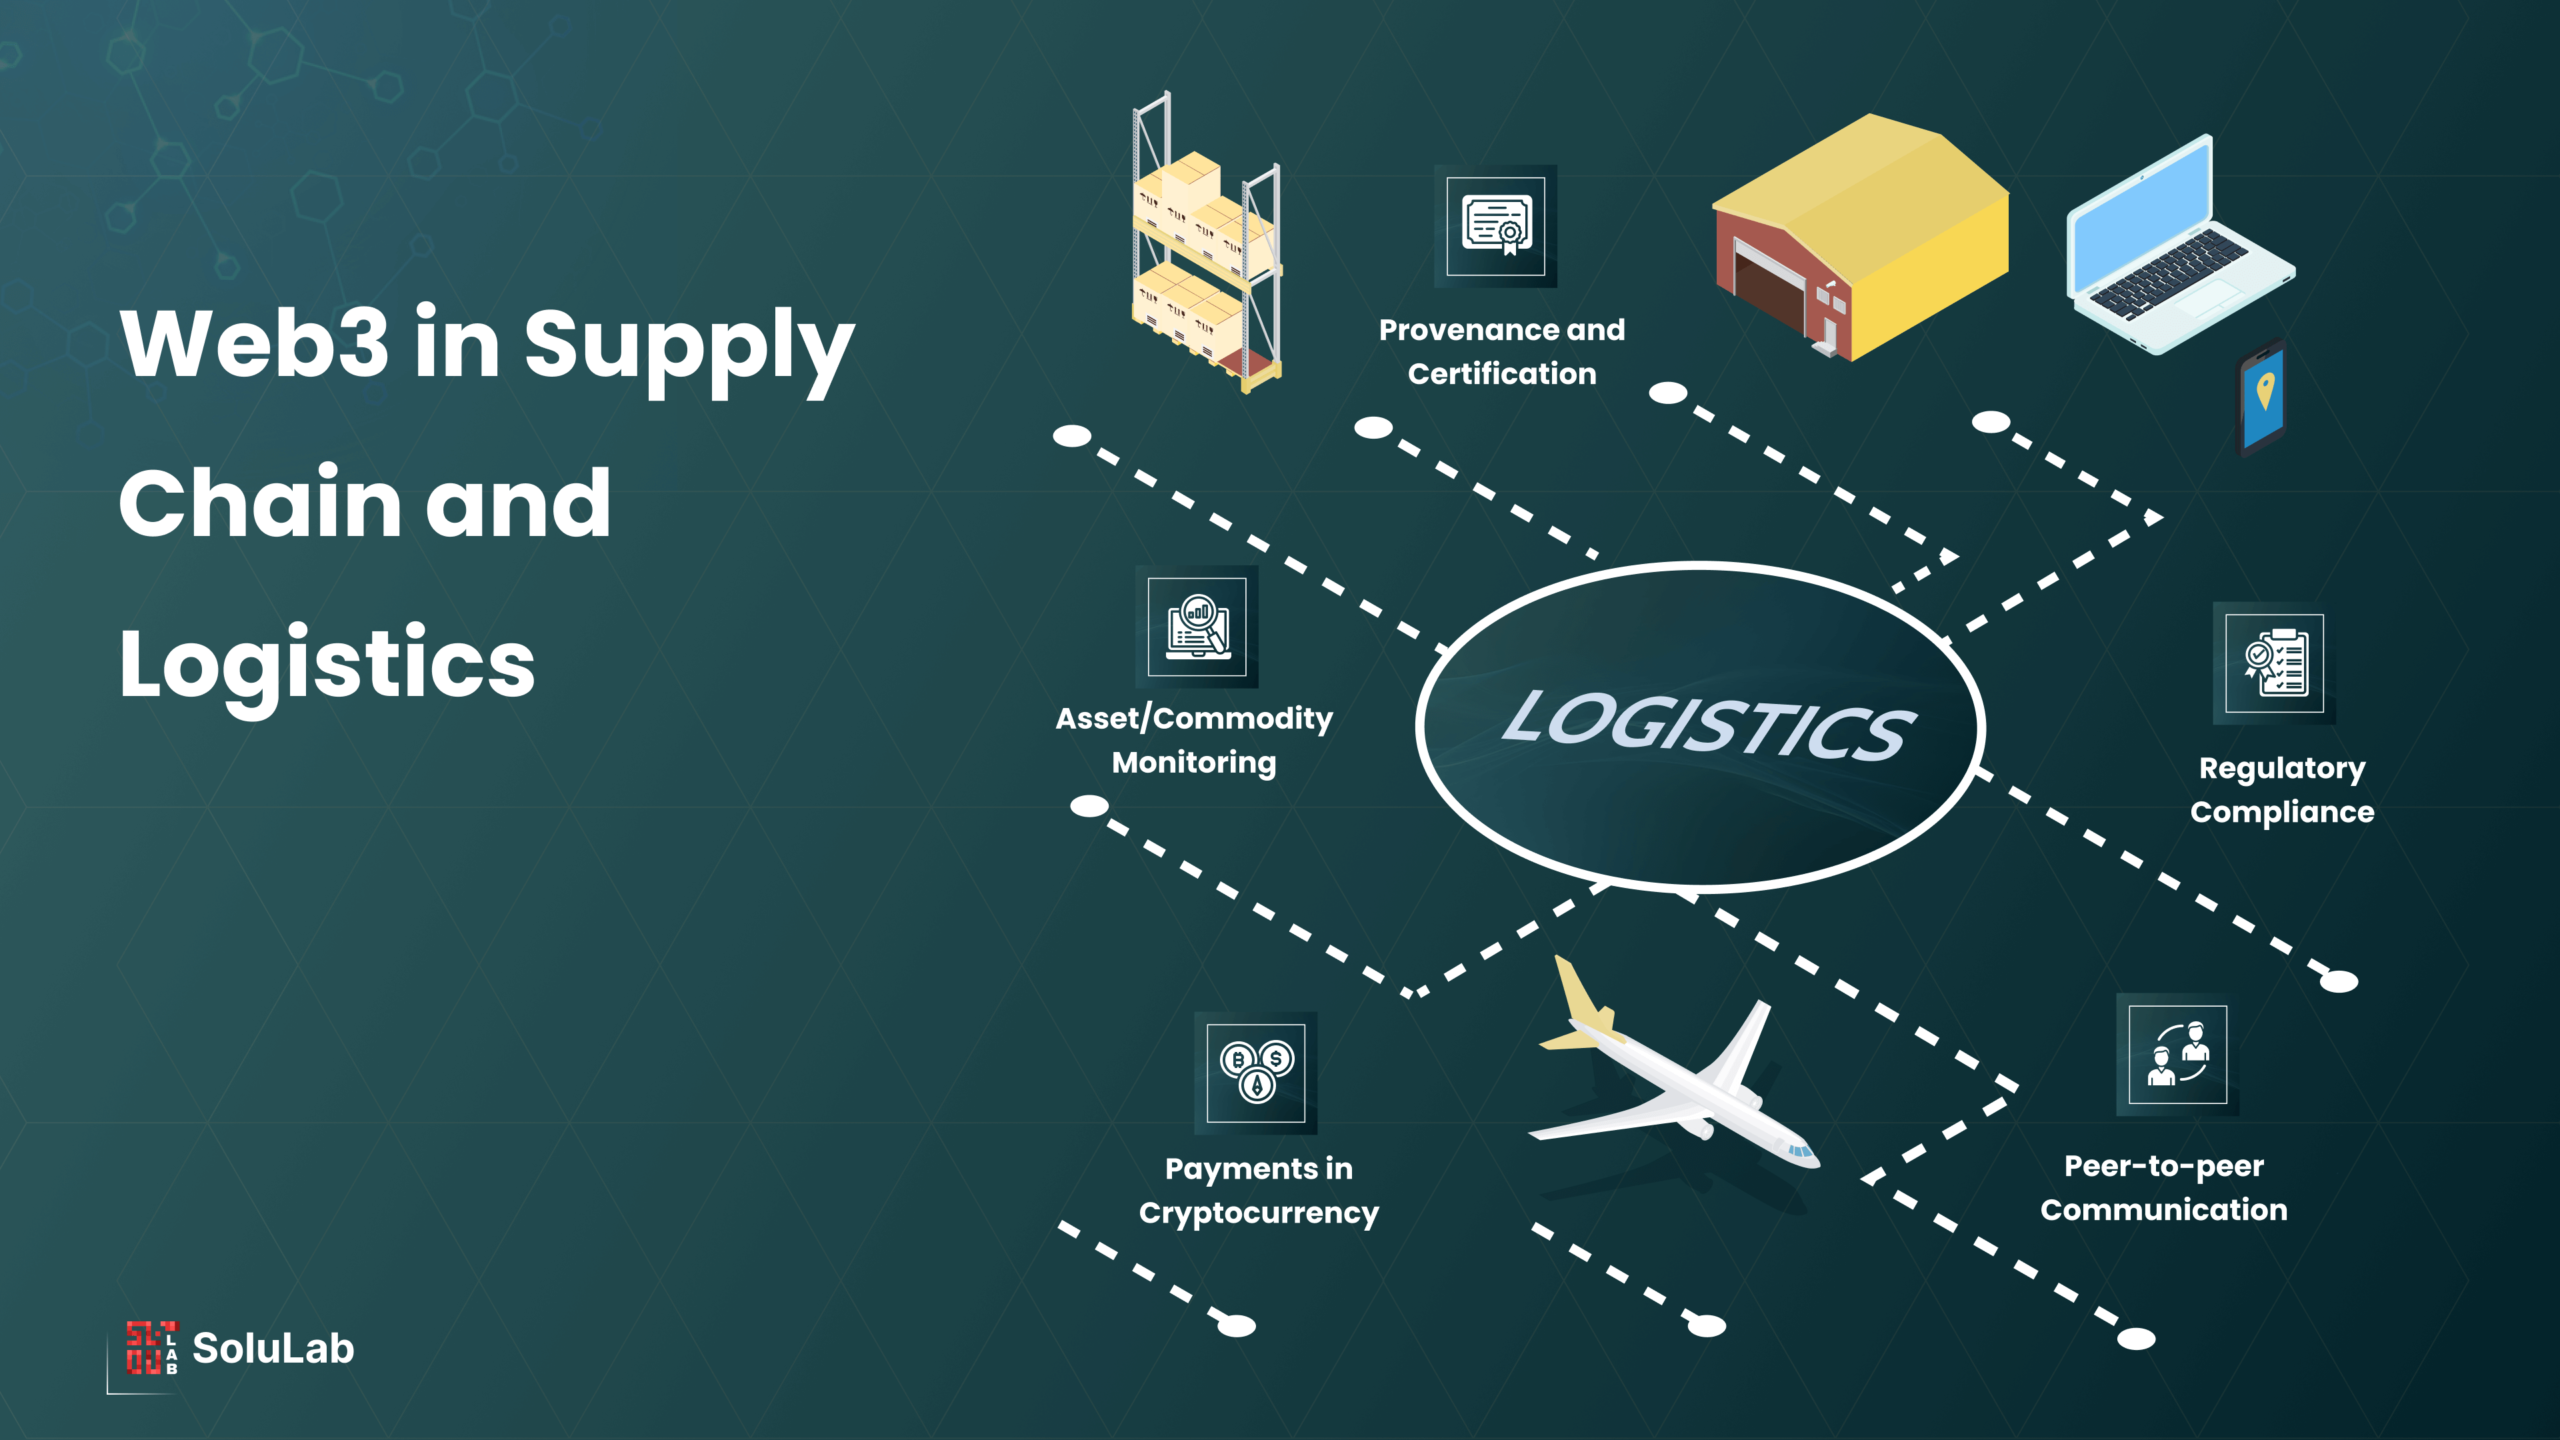 Role of Web3 in Supply Chain and Logistics